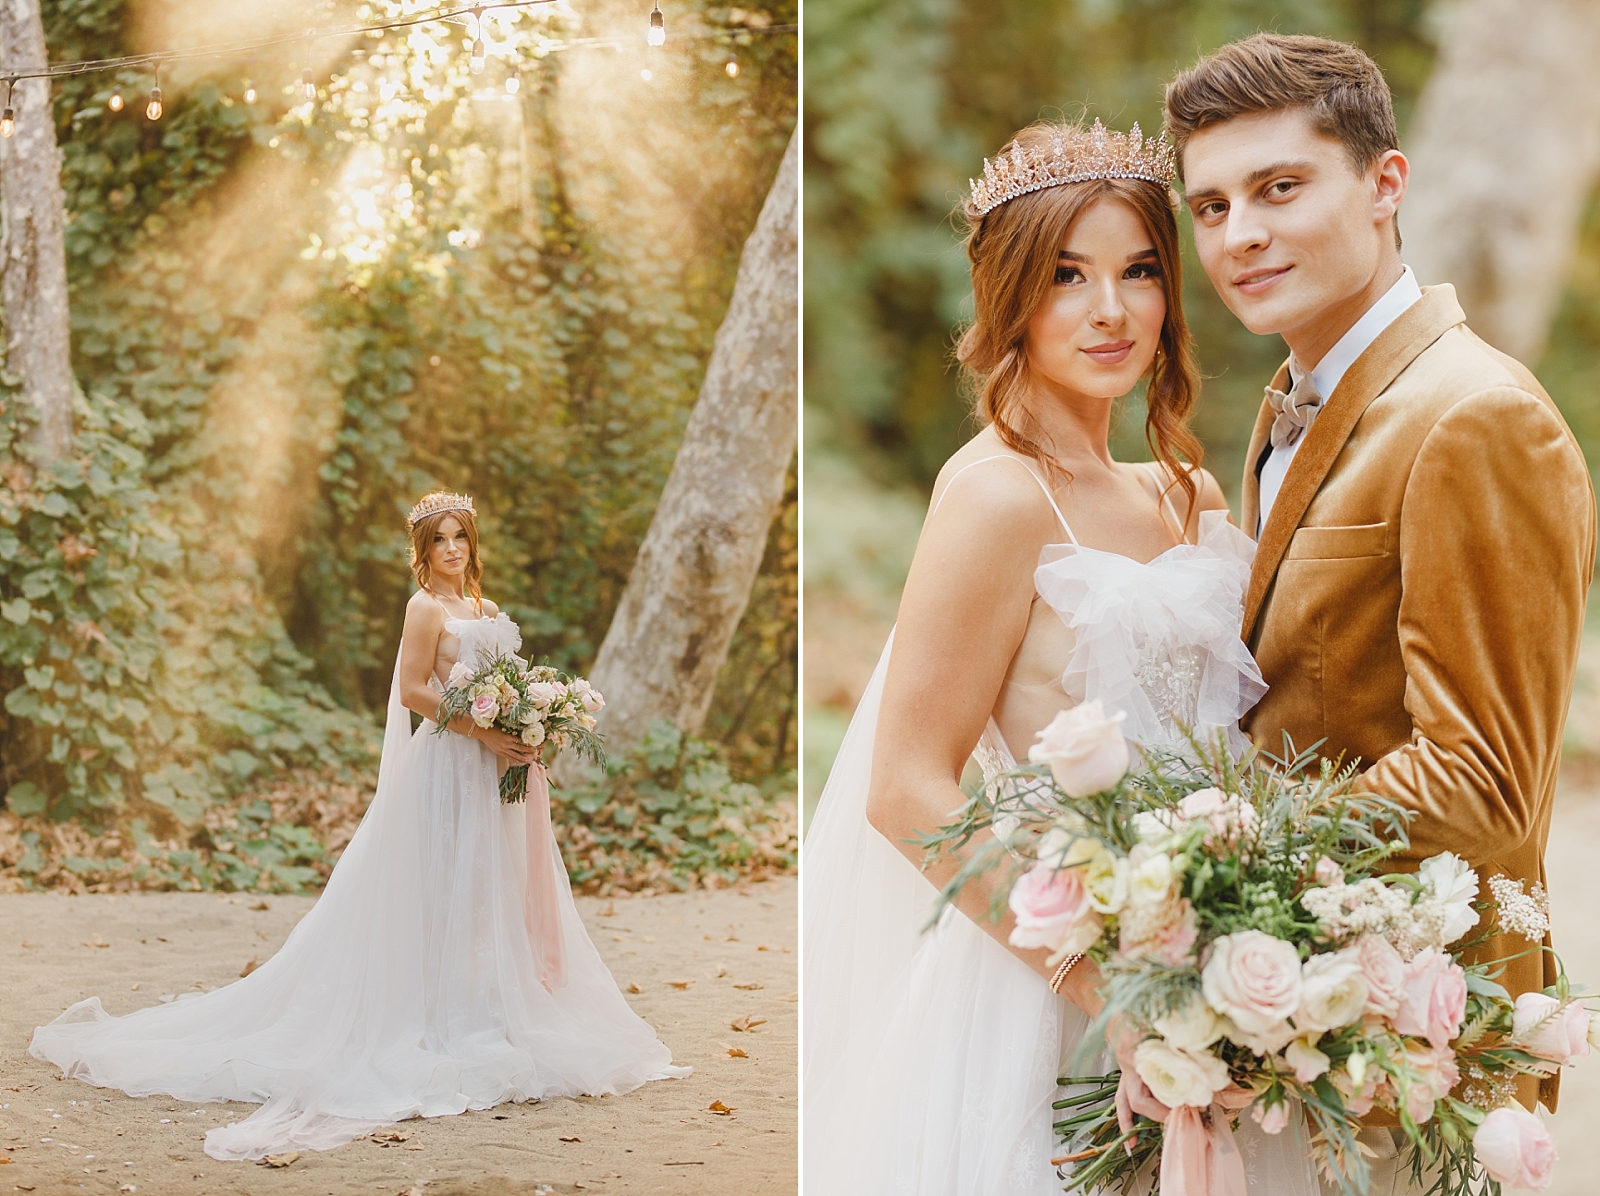 Fairytale themed wedding in Southern California forest